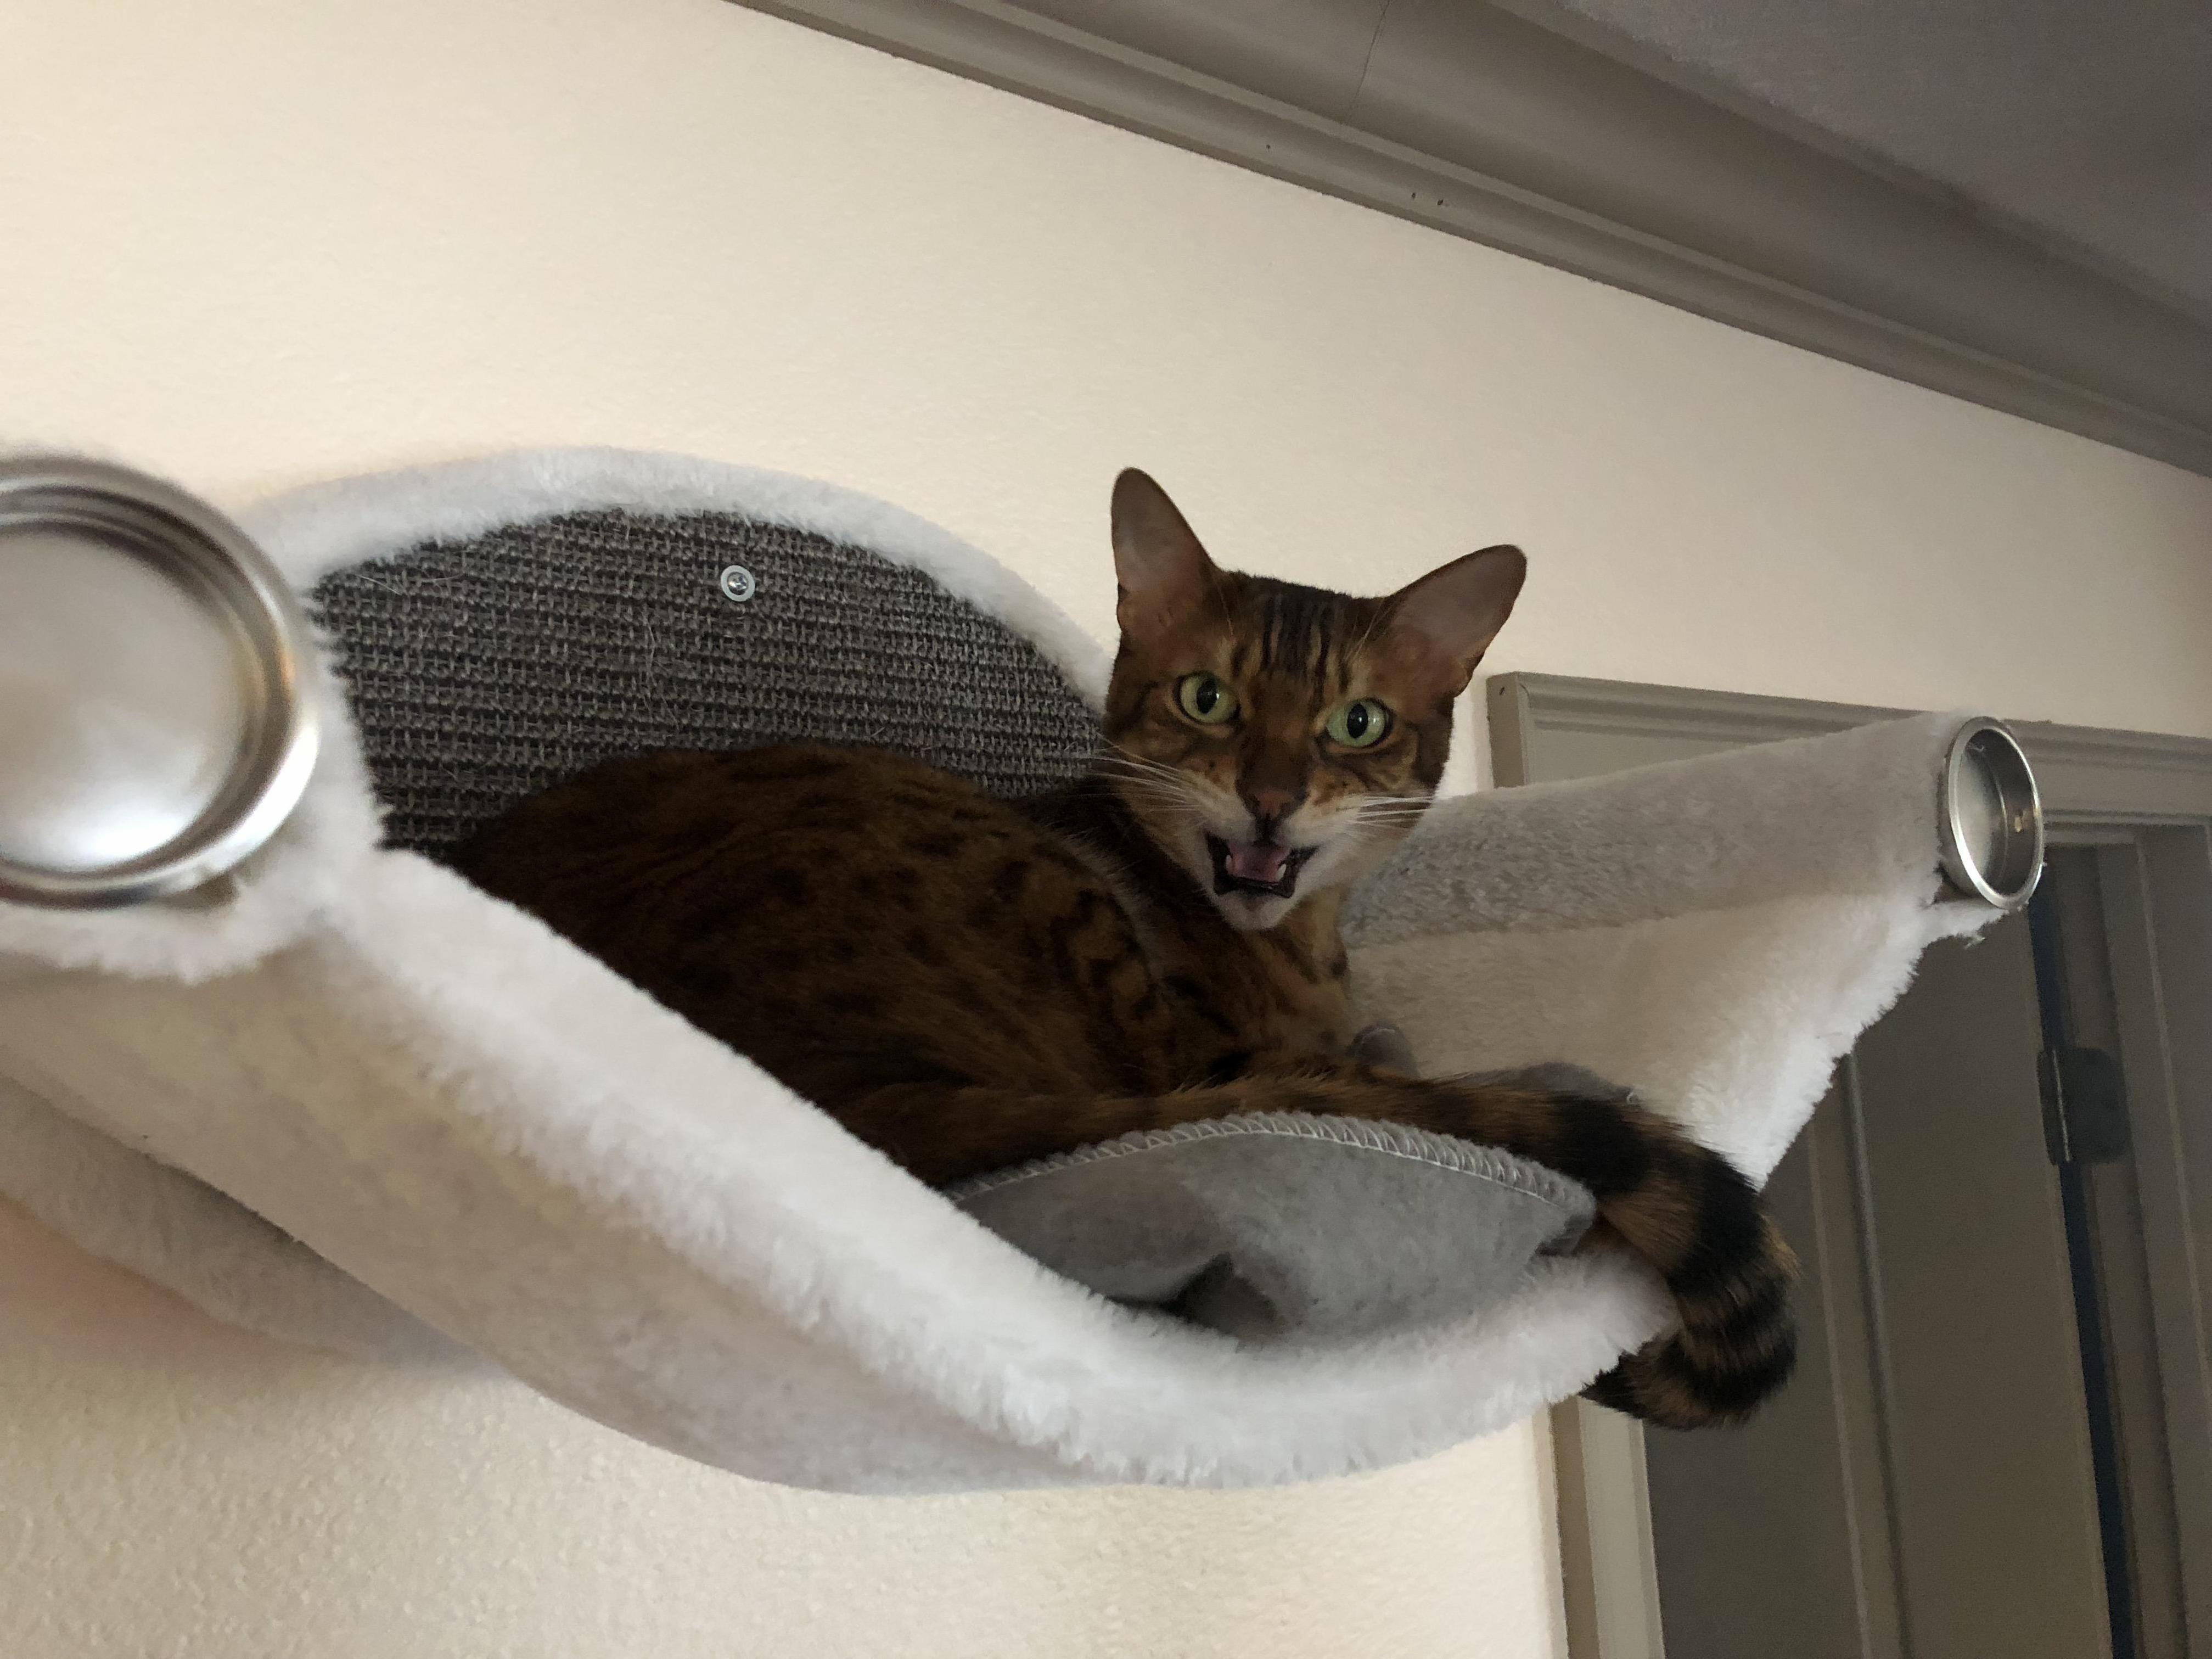 Just cat ified a nice high place for the kitty to nap. think he likes it